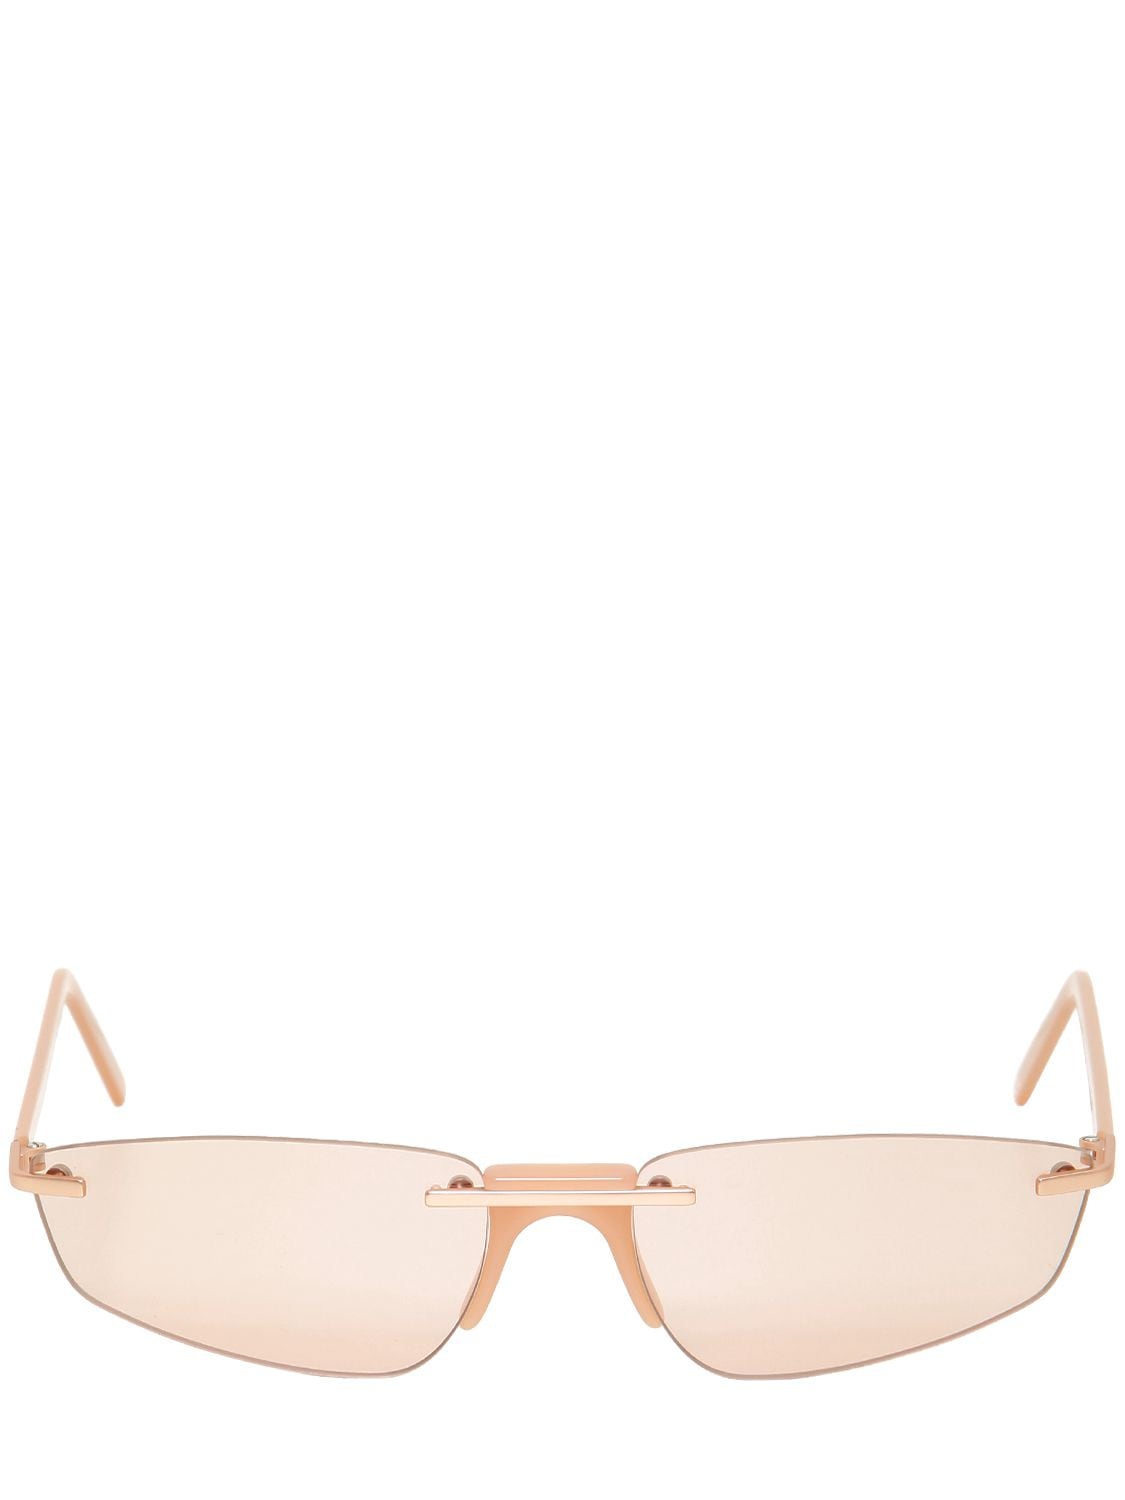 Andy Wolf Ophelia Frameless Sunglasses In Beige